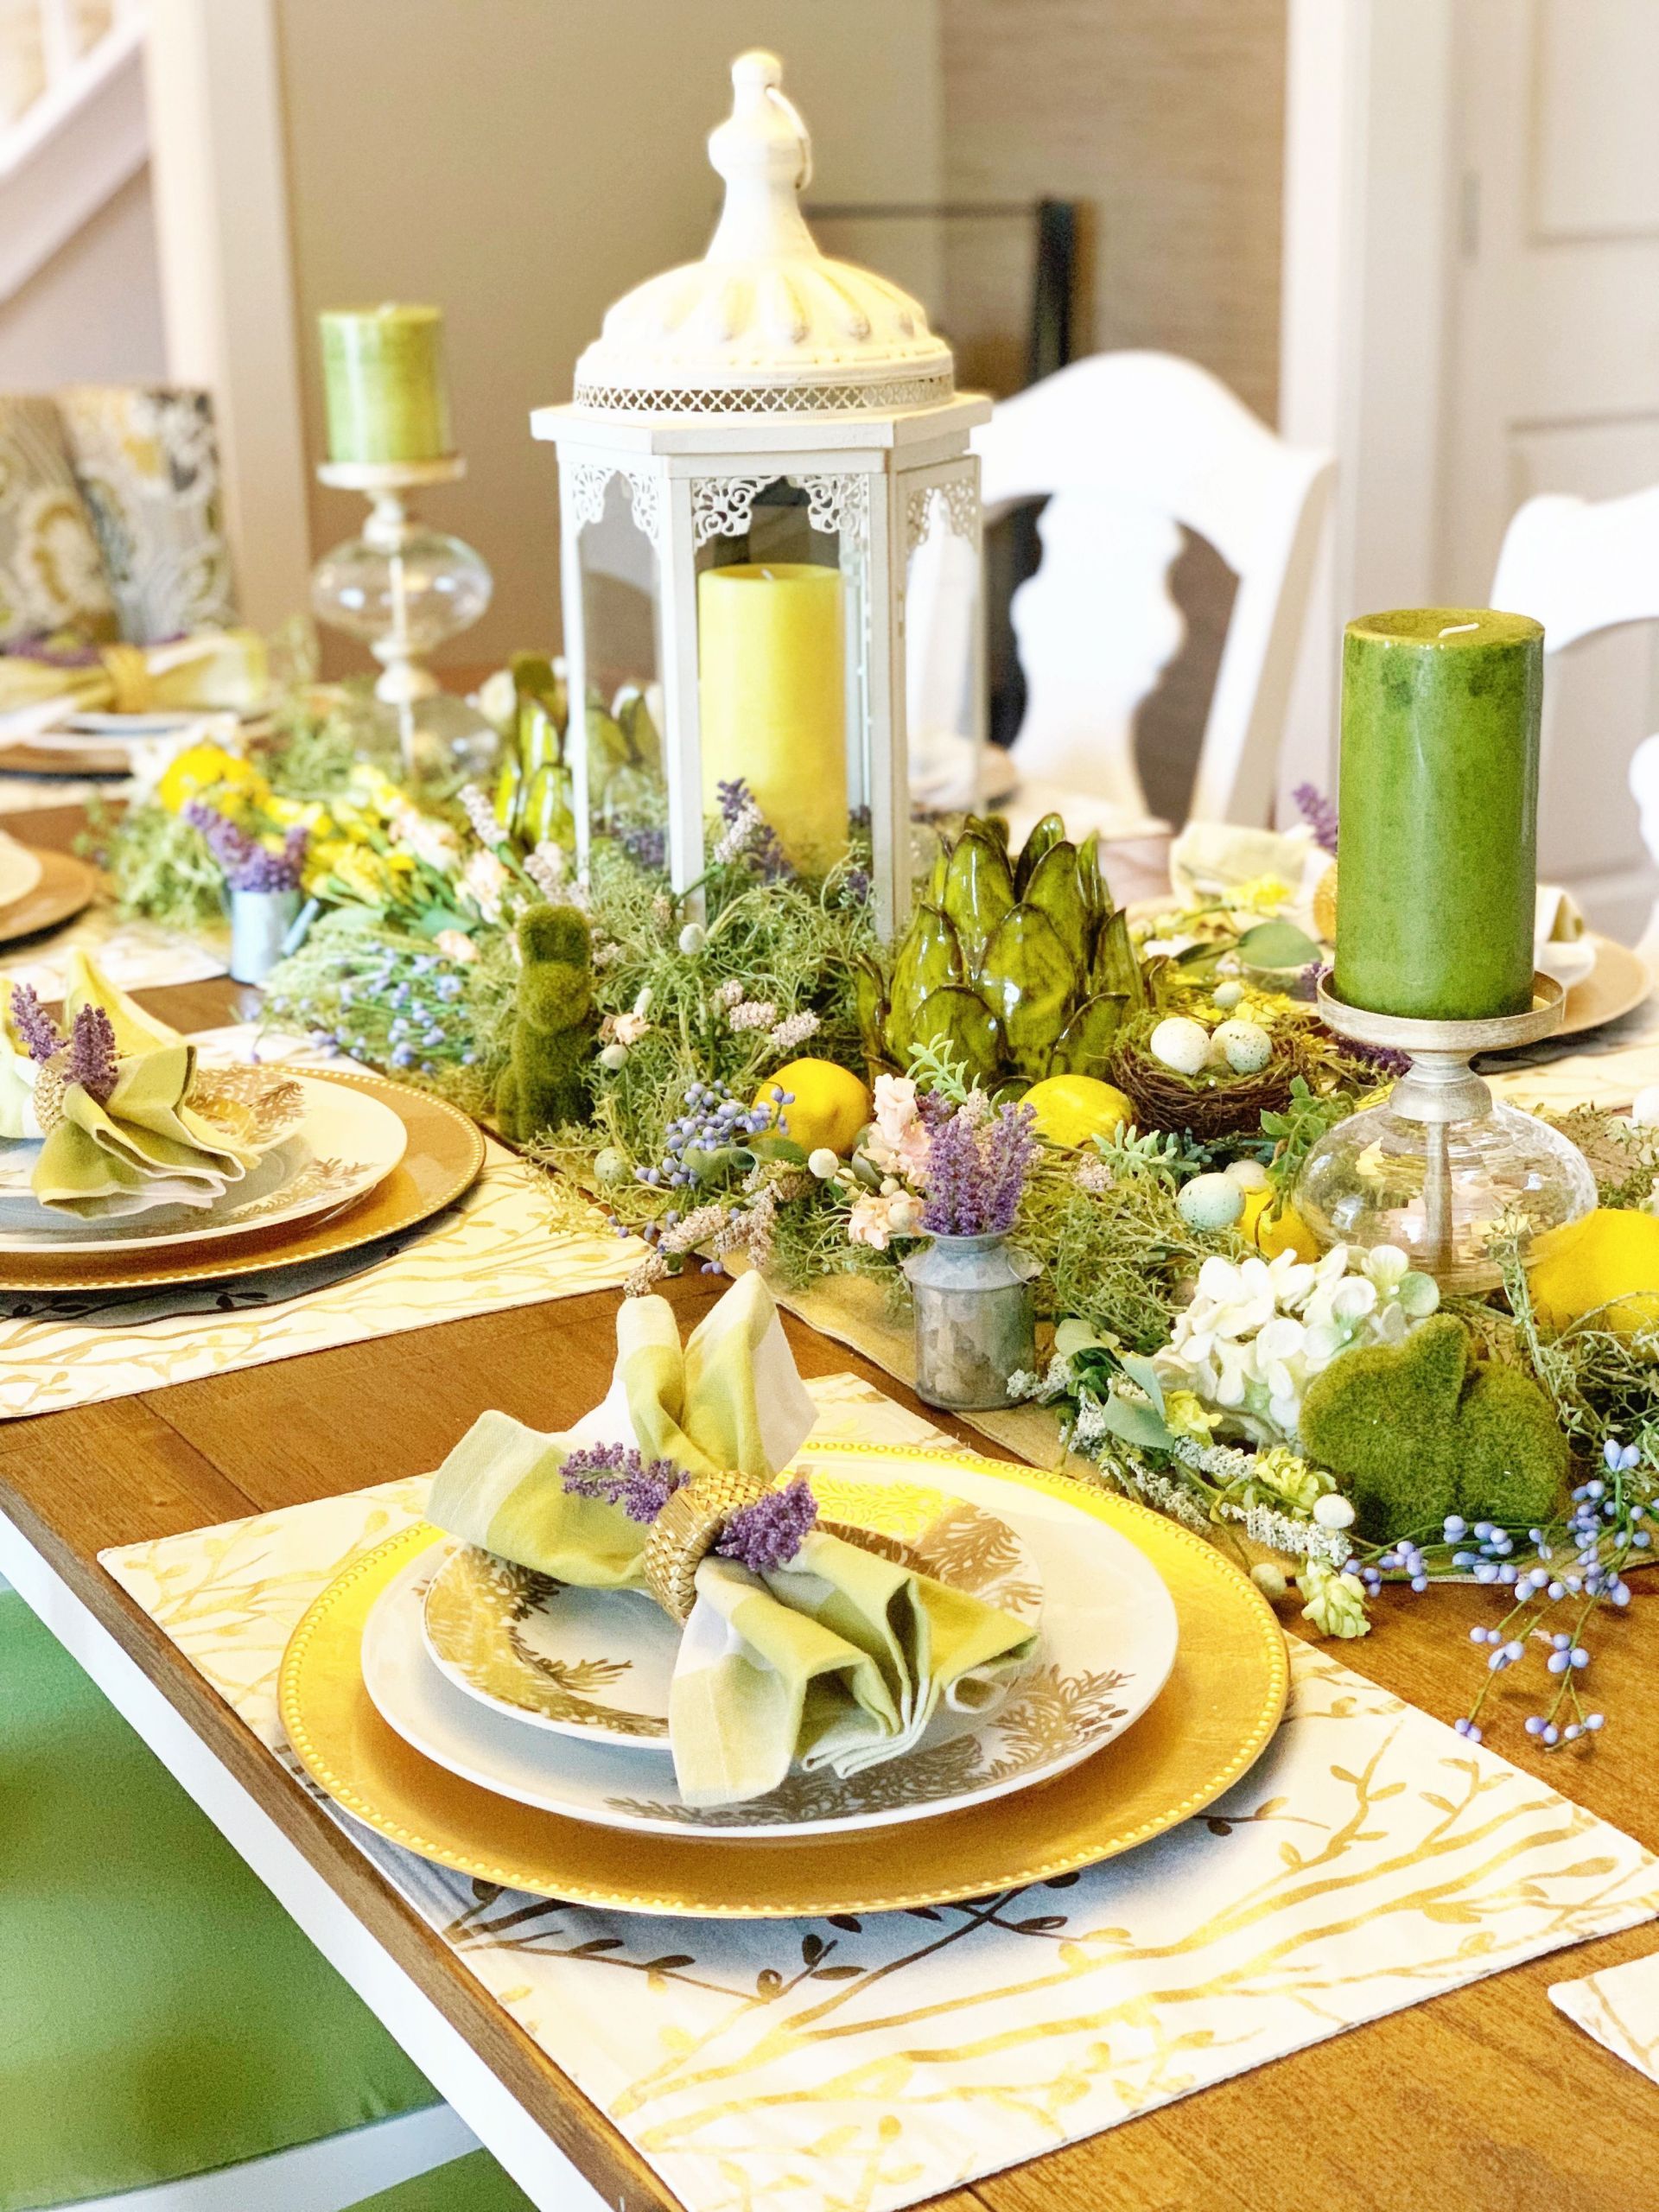 Easter Dinner Table Settings
 April spring decorations dining room table setting and